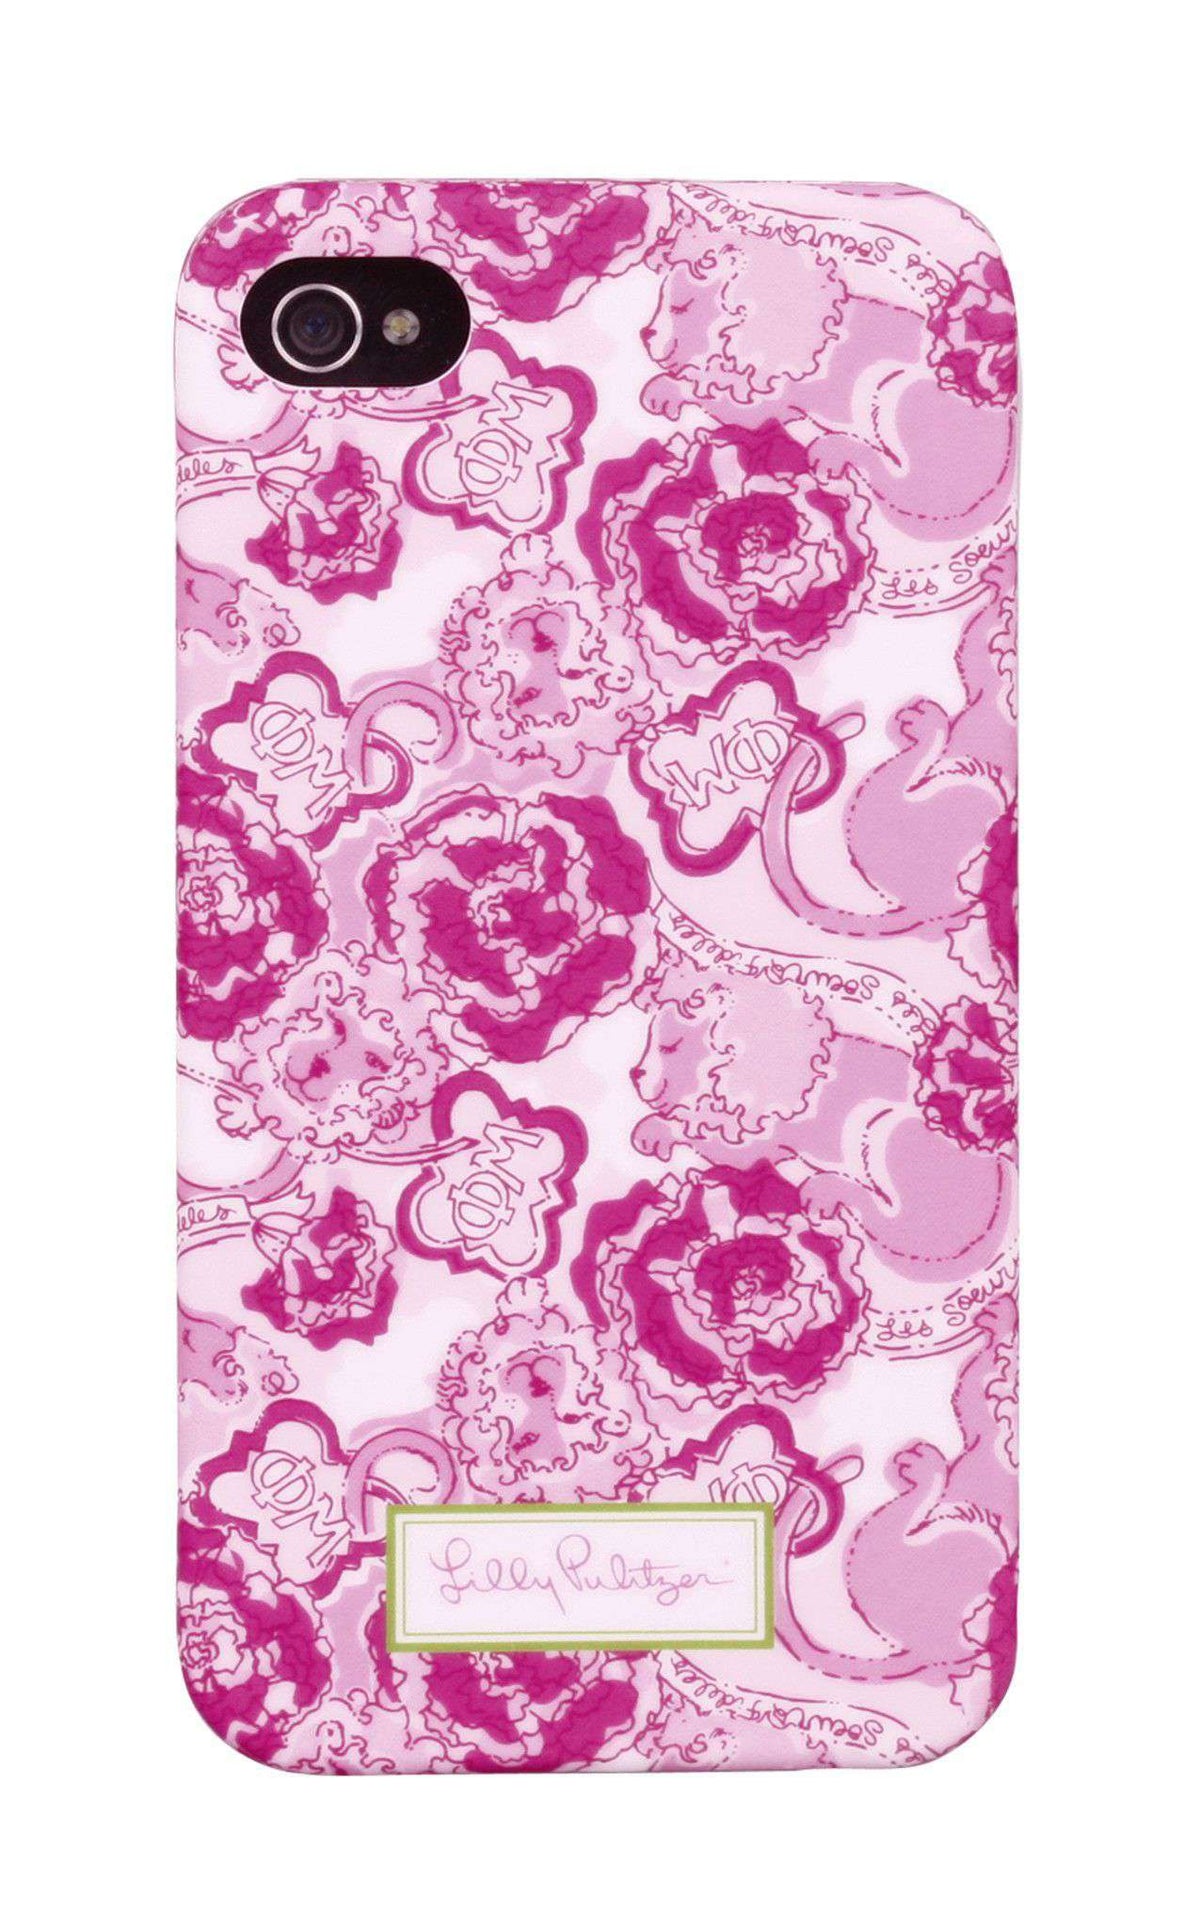 Phi Mu iPhone 4/4s Cover by Lilly Pulitzer - Country Club Prep